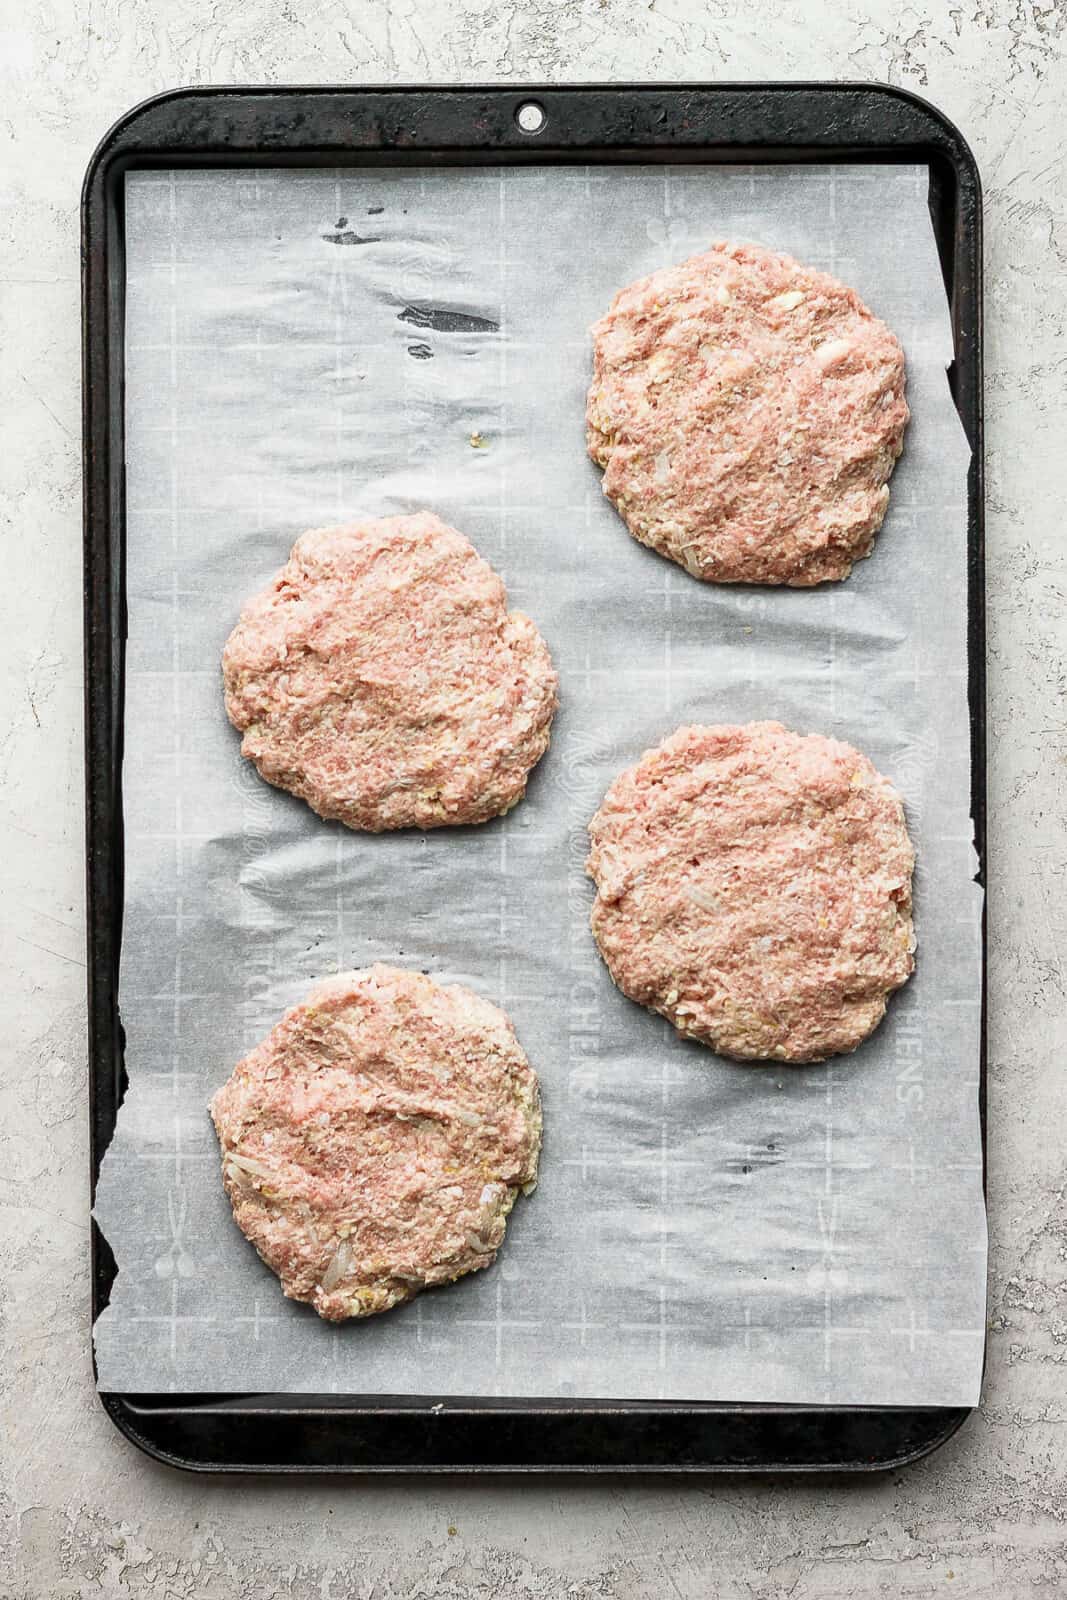 Four turkey patties on a parchment-lined baking sheet.